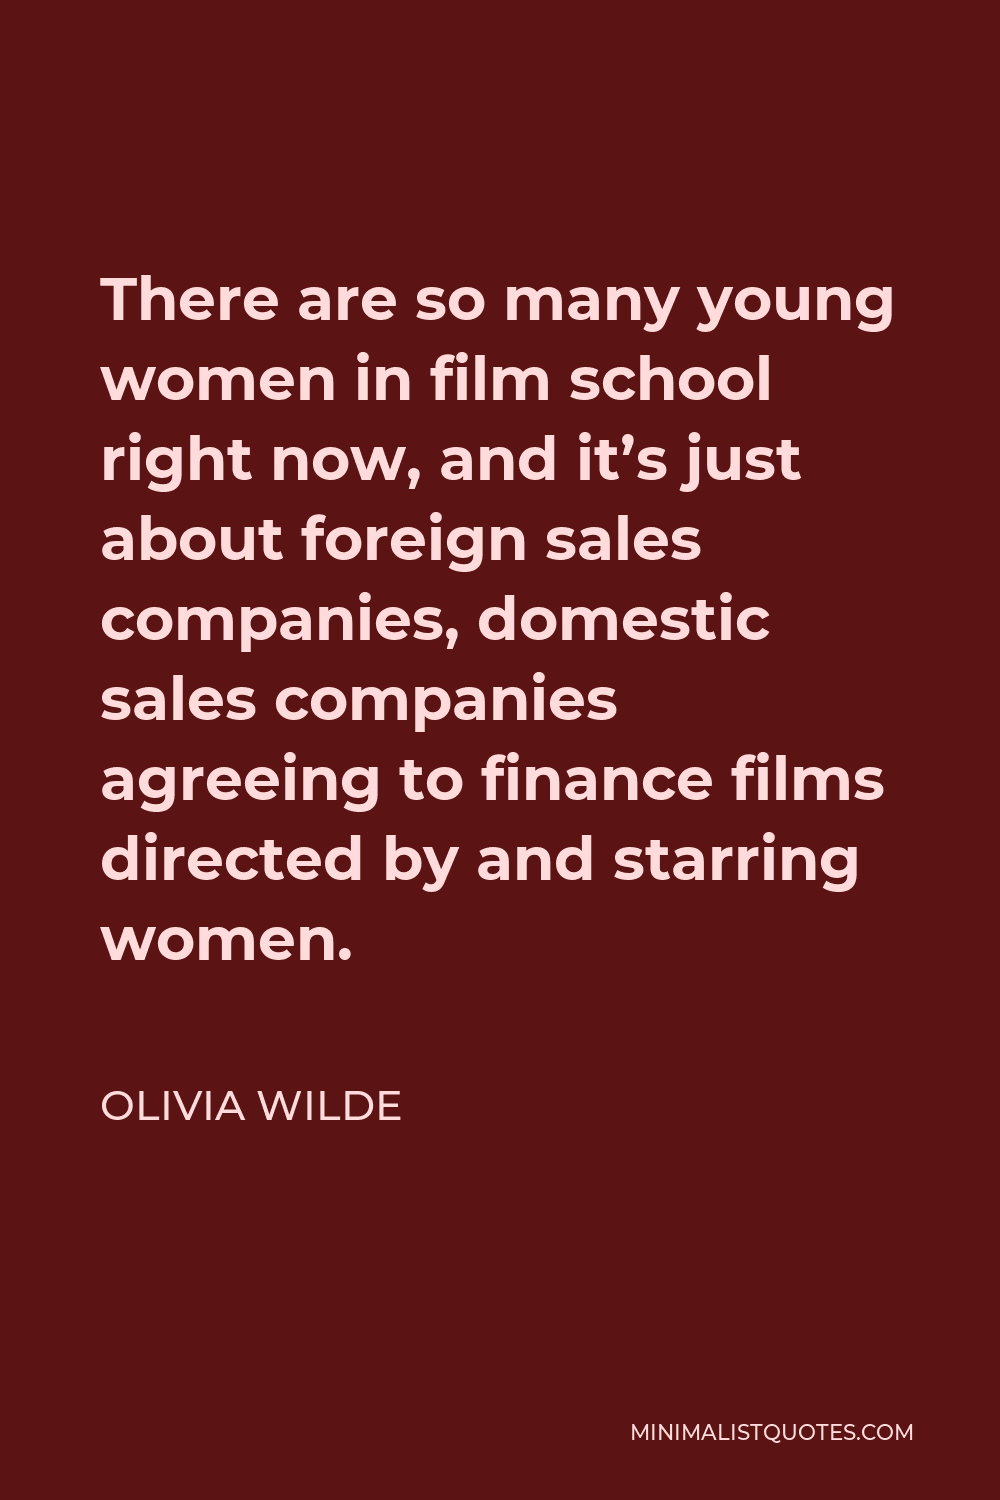 Olivia Wilde Quote - There are so many young women in film school right now, and it’s just about foreign sales companies, domestic sales companies agreeing to finance films directed by and starring women.